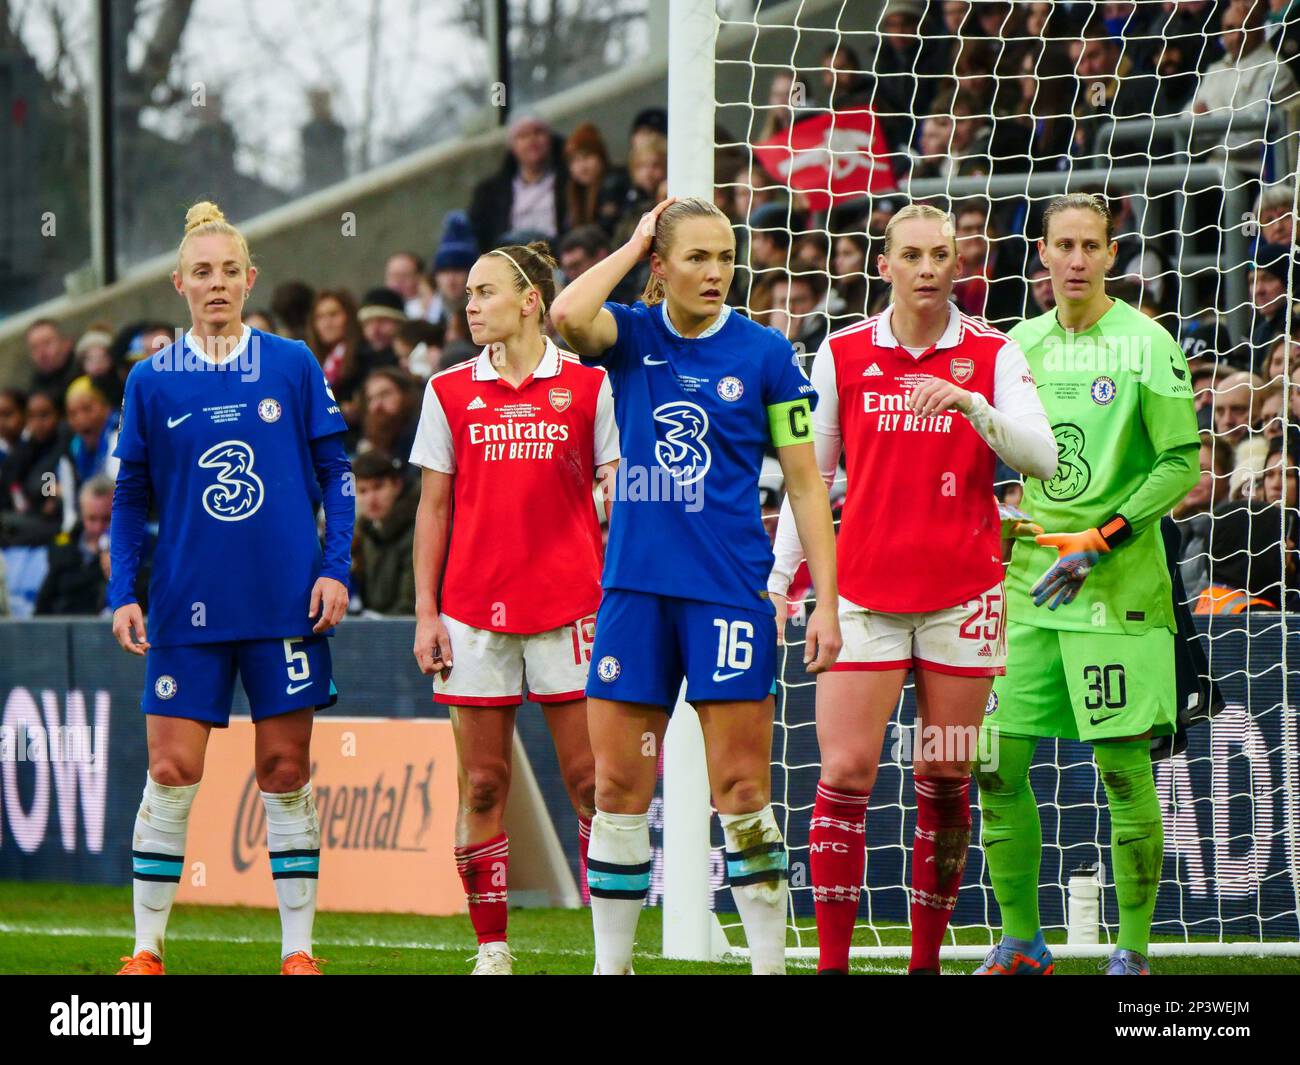 Croydon, UK. 05th Mar, 2023. Selhurst, Croydon, England, March 5th 2023: Sophie Ingle (5 Chelsea) and Magalena Eriksson (16 Chelsea) look to defend a corner during FA Women's League Cup Final game between Arsenal and Chelsea at Selhurst Park in Selhurst, Croydon, England. (Claire Jeffrey/SPP) Credit: SPP Sport Press Photo. /Alamy Live News Stock Photo